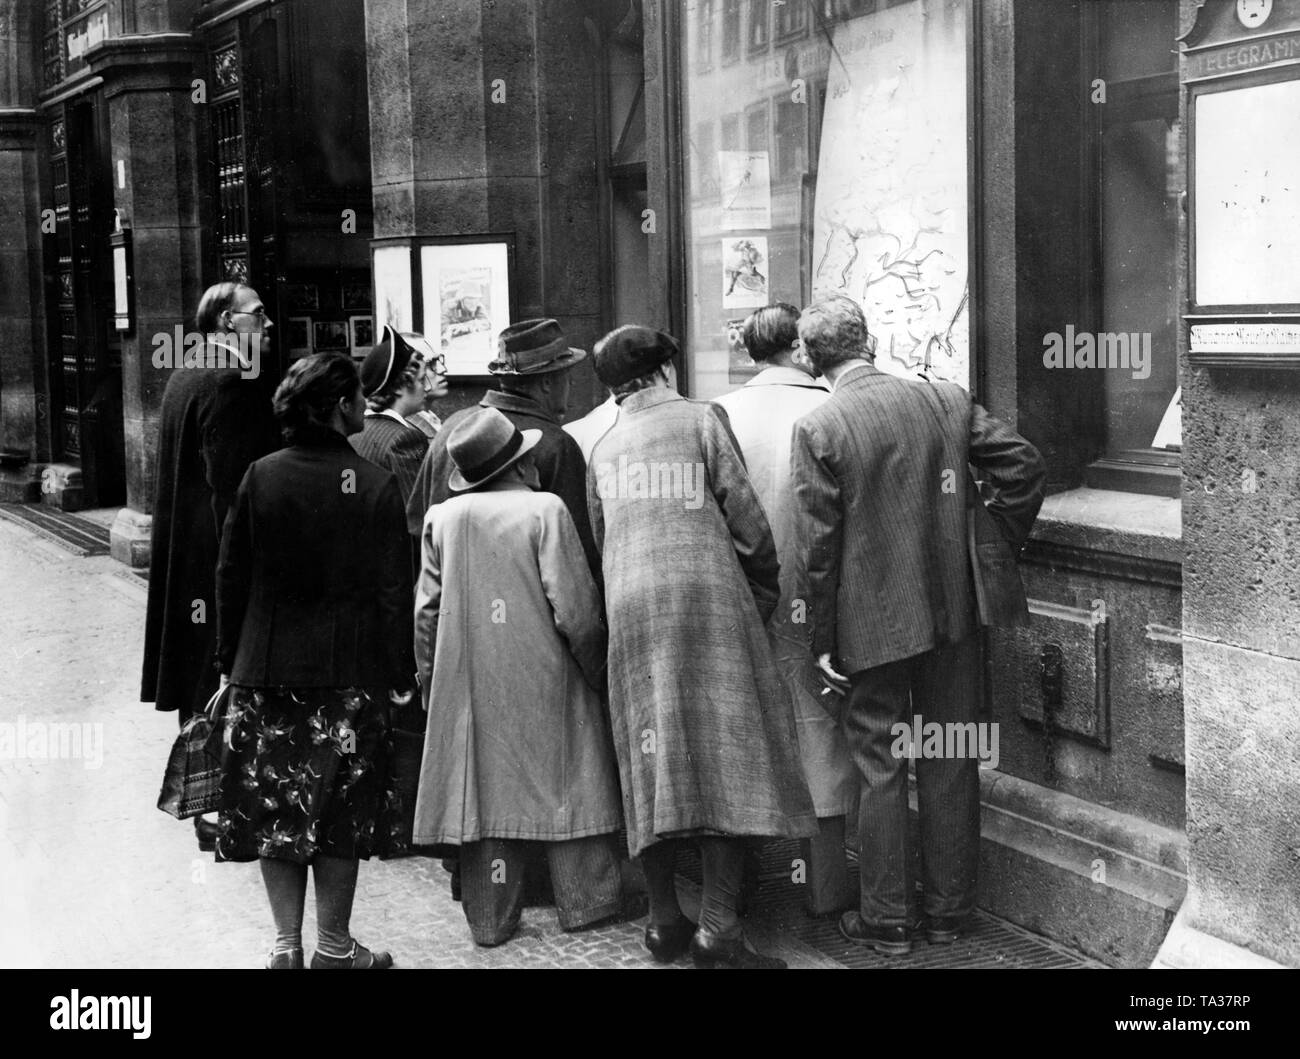 A group of passers-by in front of a notice board at the building of the publisher Knorr & Hirth (Munchner Neueste Nachrichten) in Sendlinger Strasse, Munich. On the map the British Isles, so it's probably about the Battle of Britain 1940/41. Undated photo. Stock Photo